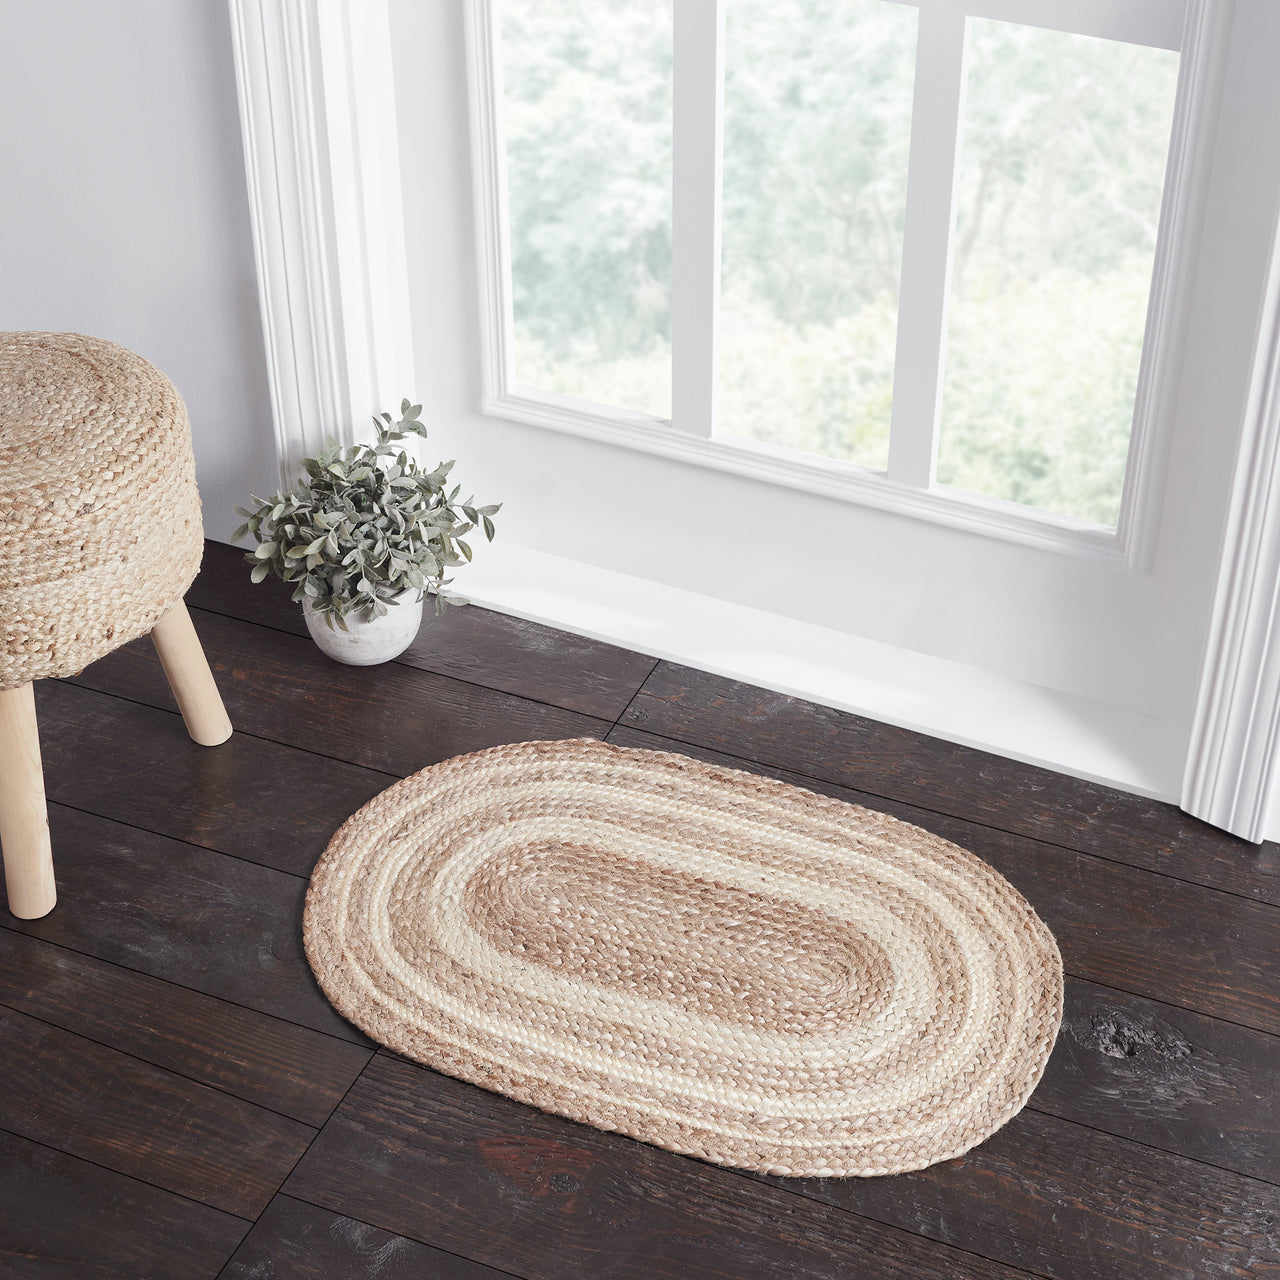 Natural & Creme Jute Braided Rugs Oval with Rug Pads VHC Brands